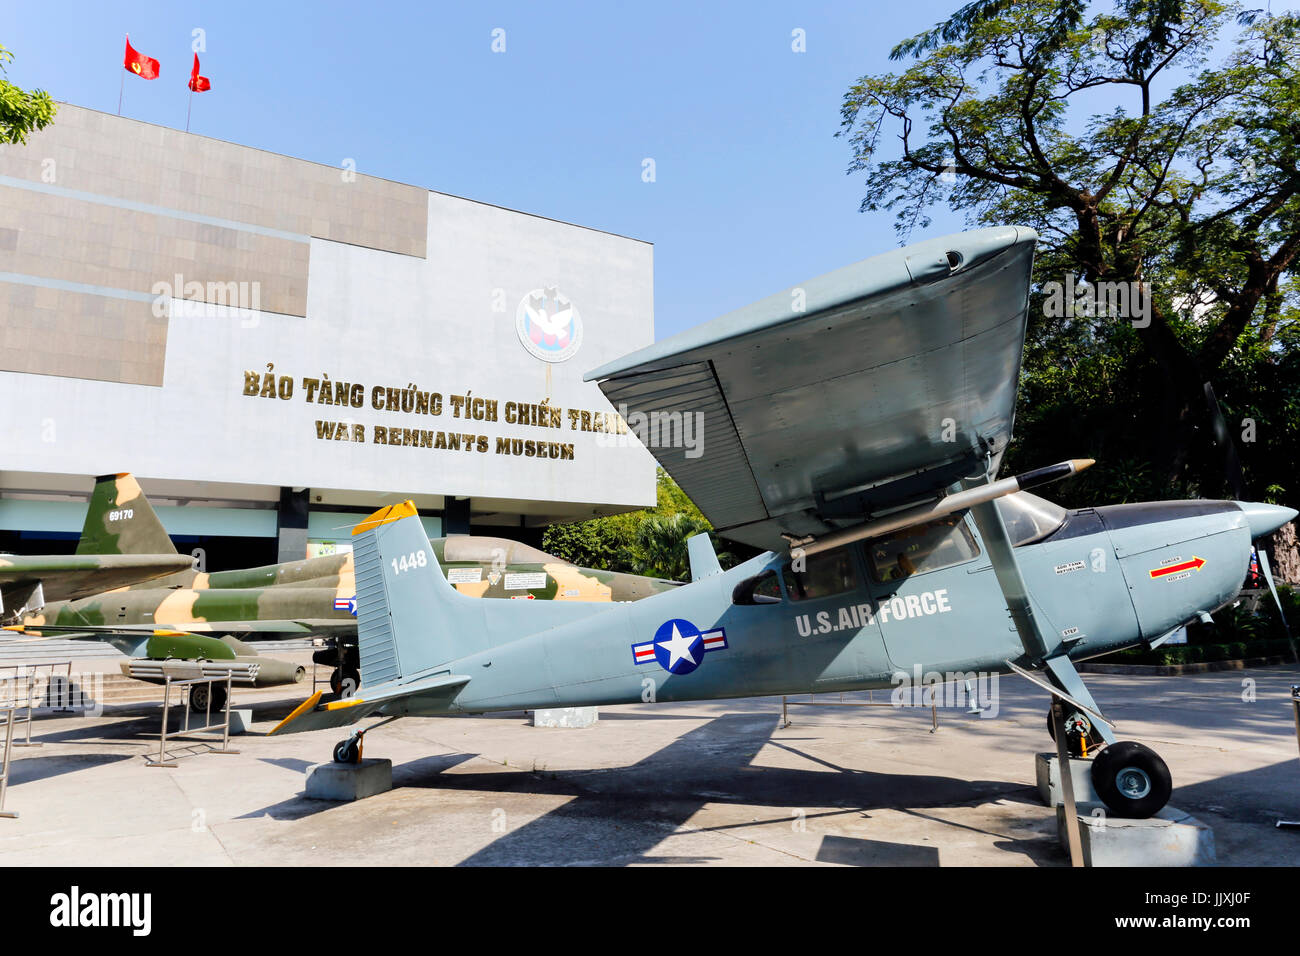 Ho Chi Minh City, Vietnam - January 19, 2016: The War Remnants Museum is a war museum in District 3, Ho Chi Minh City, Vietnam. Stock Photo